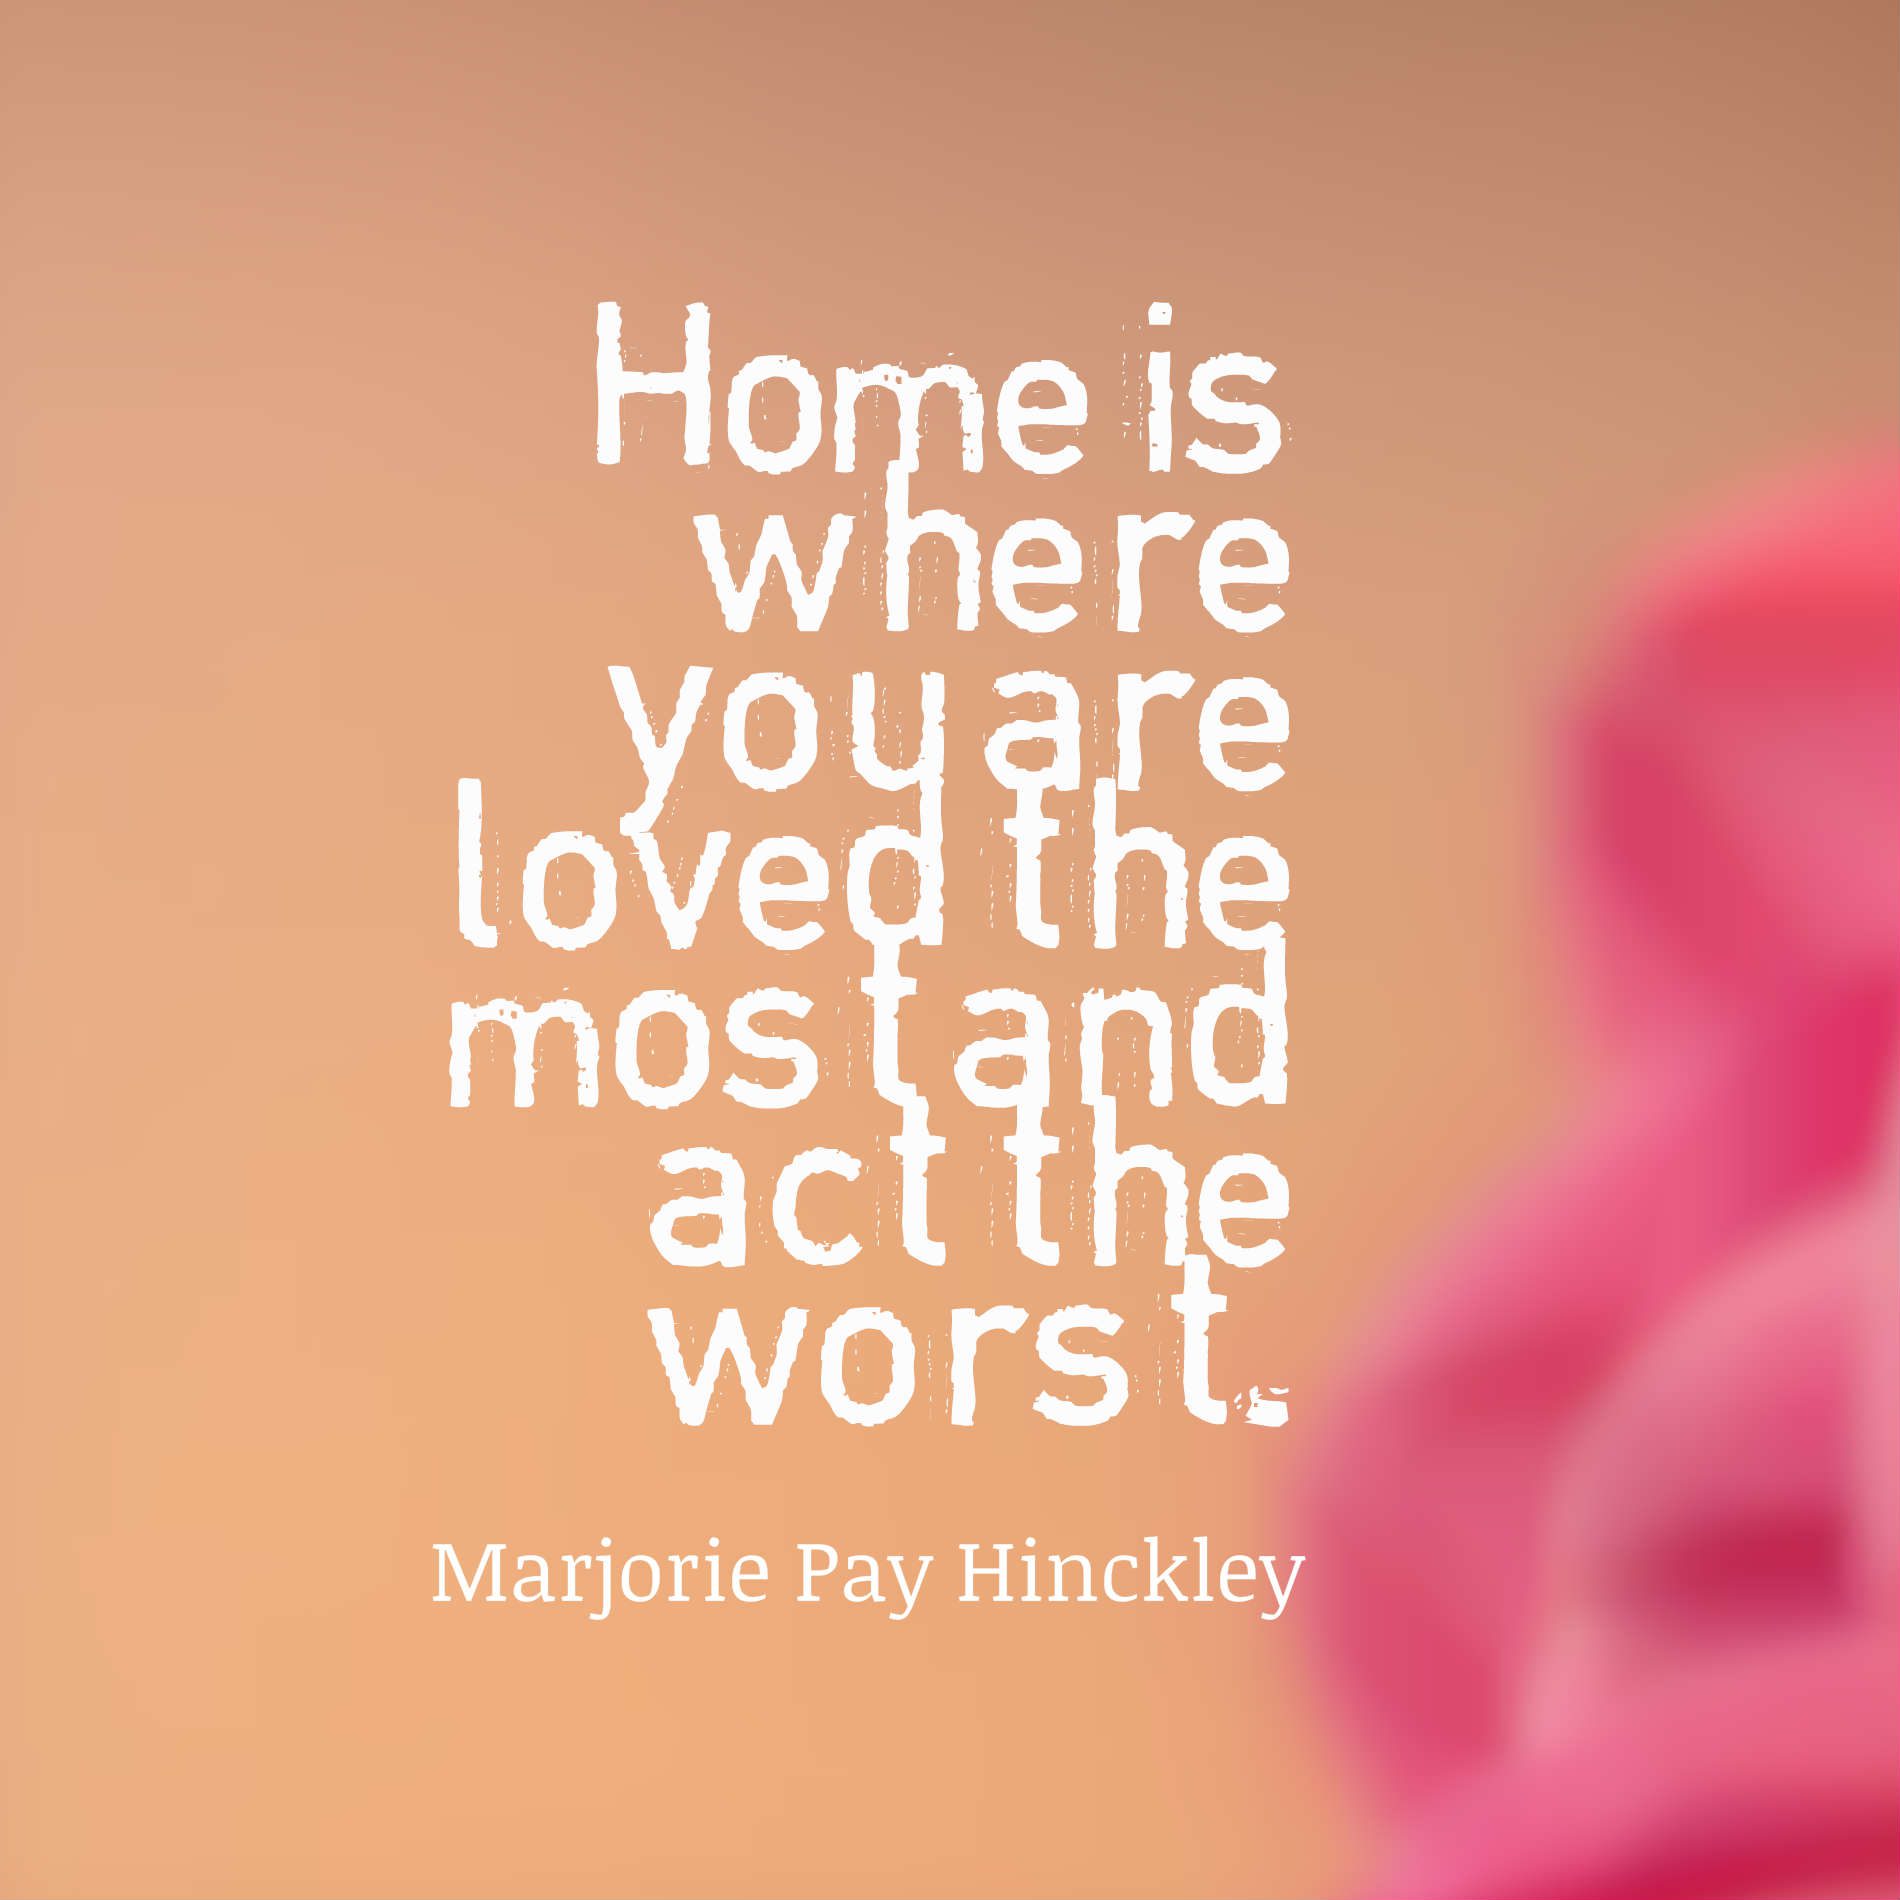 Home is where you are loved the most and act the worst.